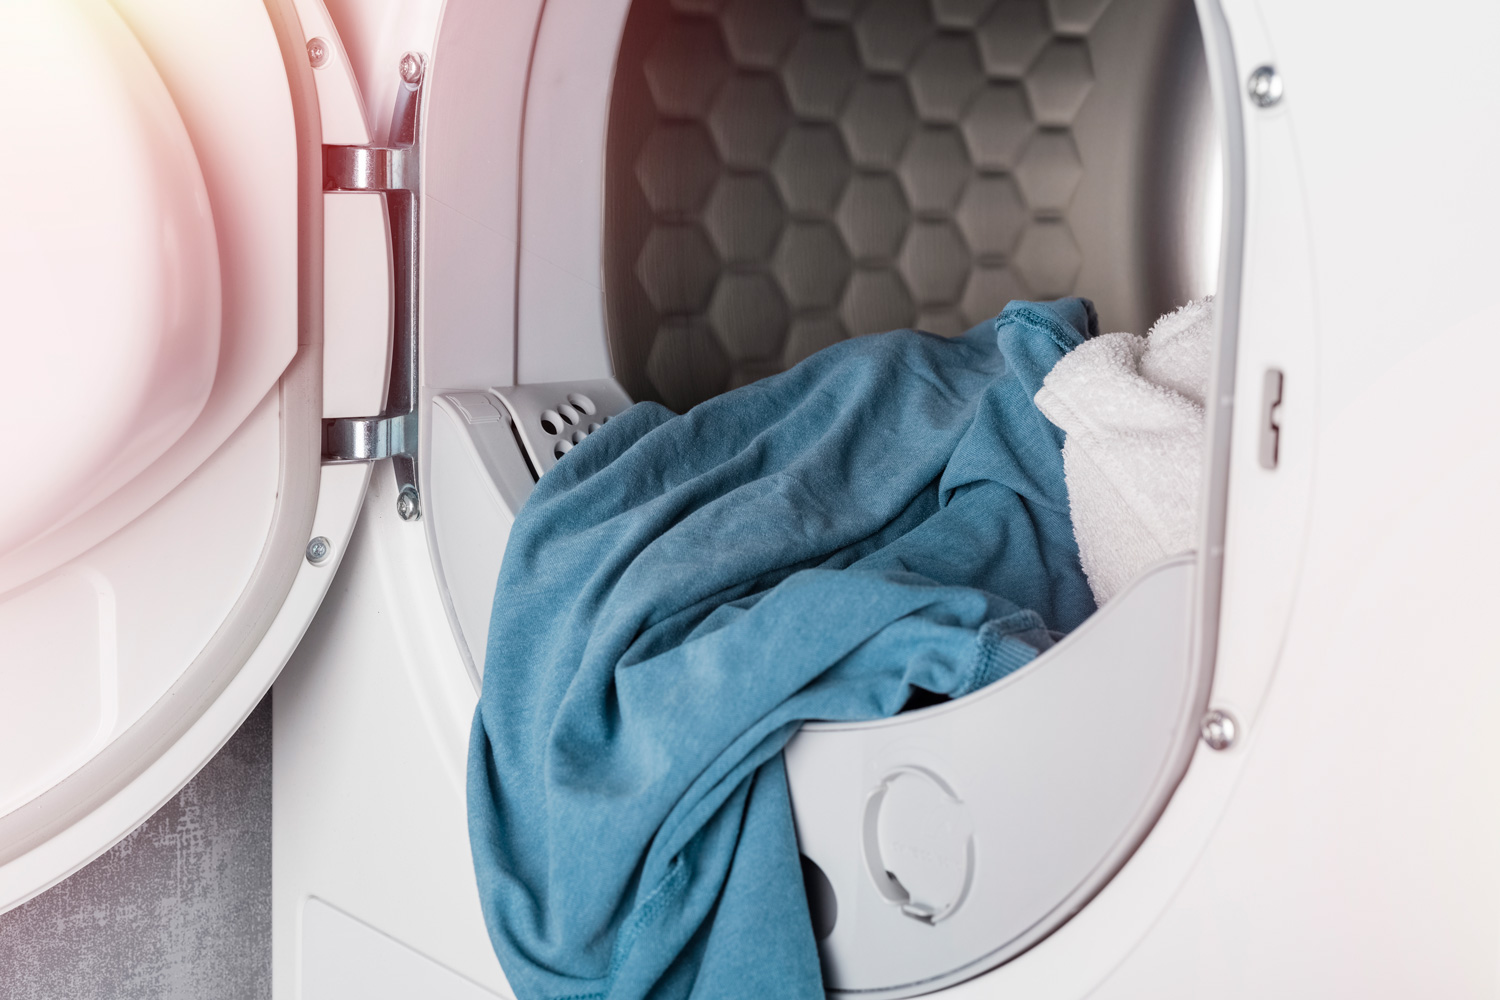 Clean linen in the washing machine or dryer, close-up. Laundry concept